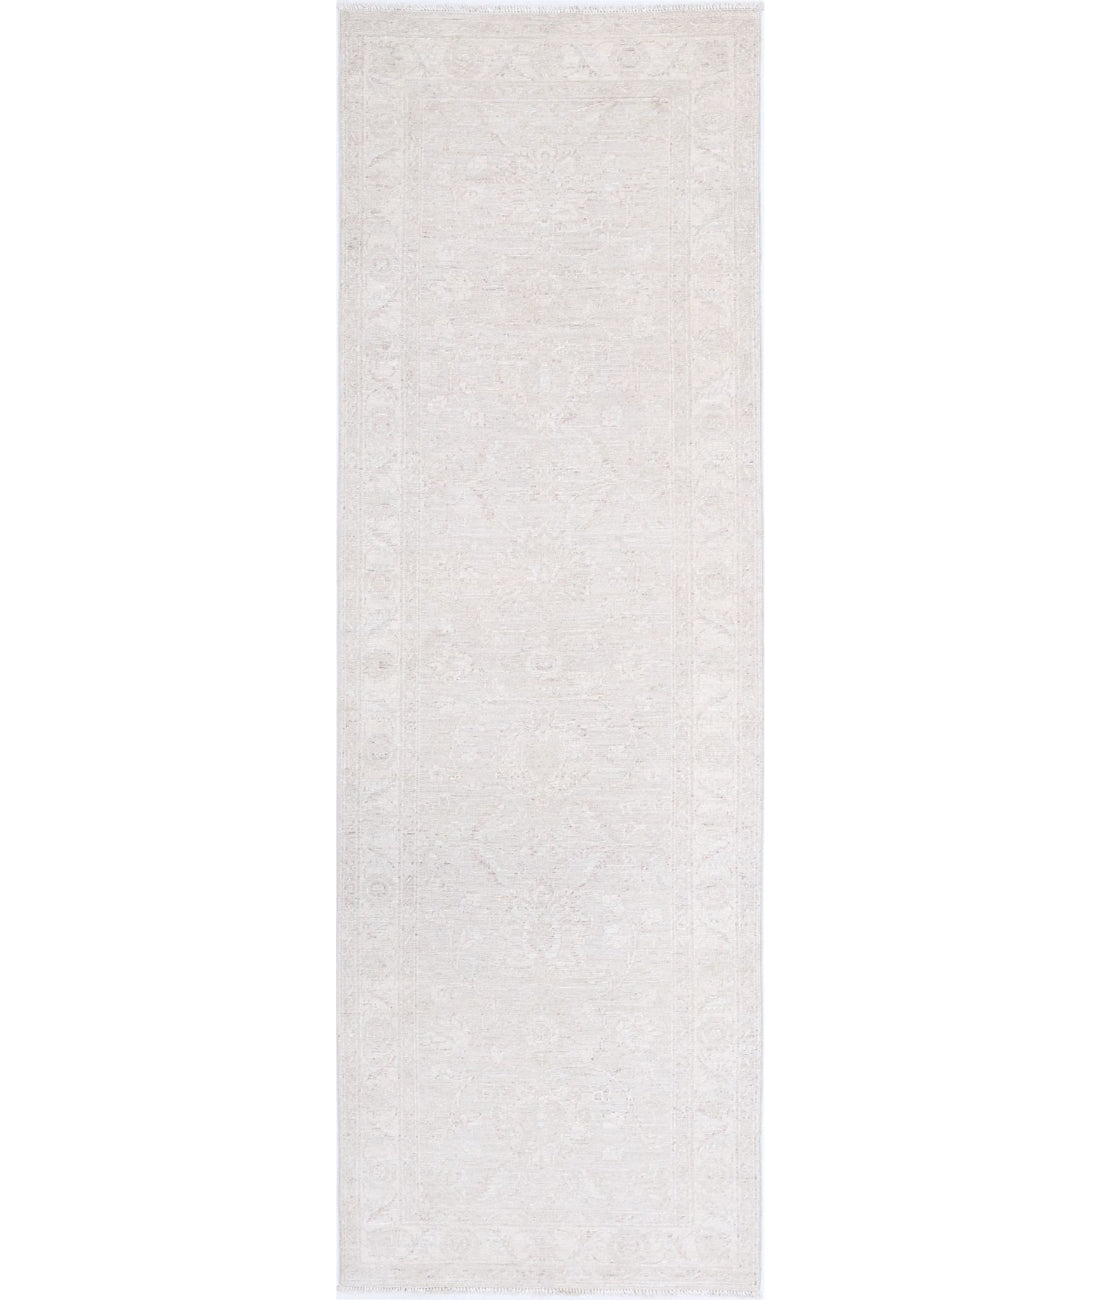 Hand Knotted Serenity Wool Rug - 2'6'' x 8'2'' 2'6'' x 8'2'' (75 X 245) / Grey / Ivory